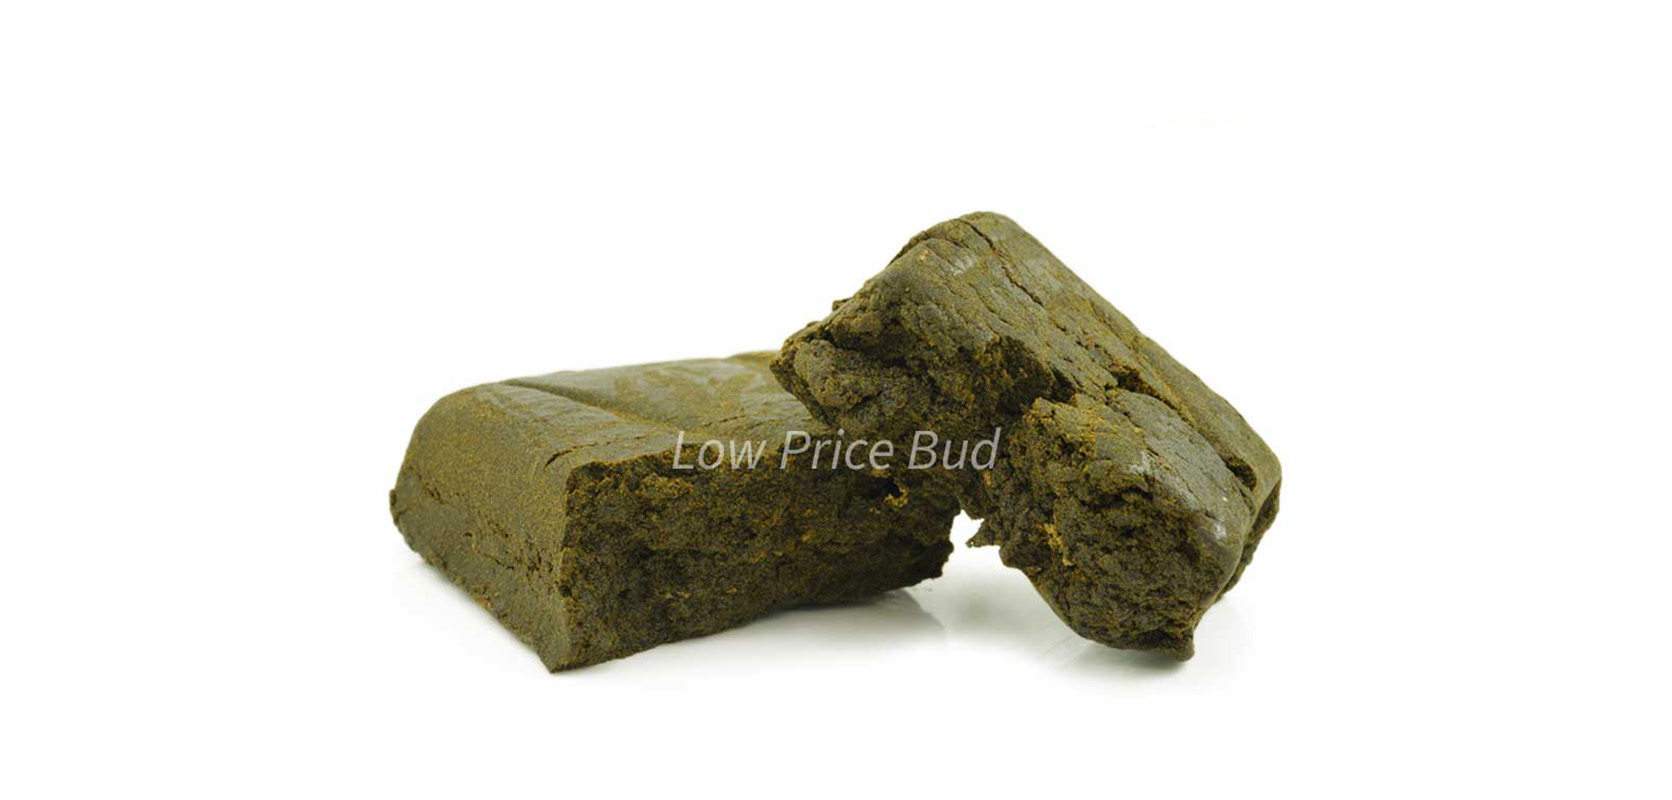 Black hash from Low Price Bud online weed dispensary. Buy Hash Online in Canada.